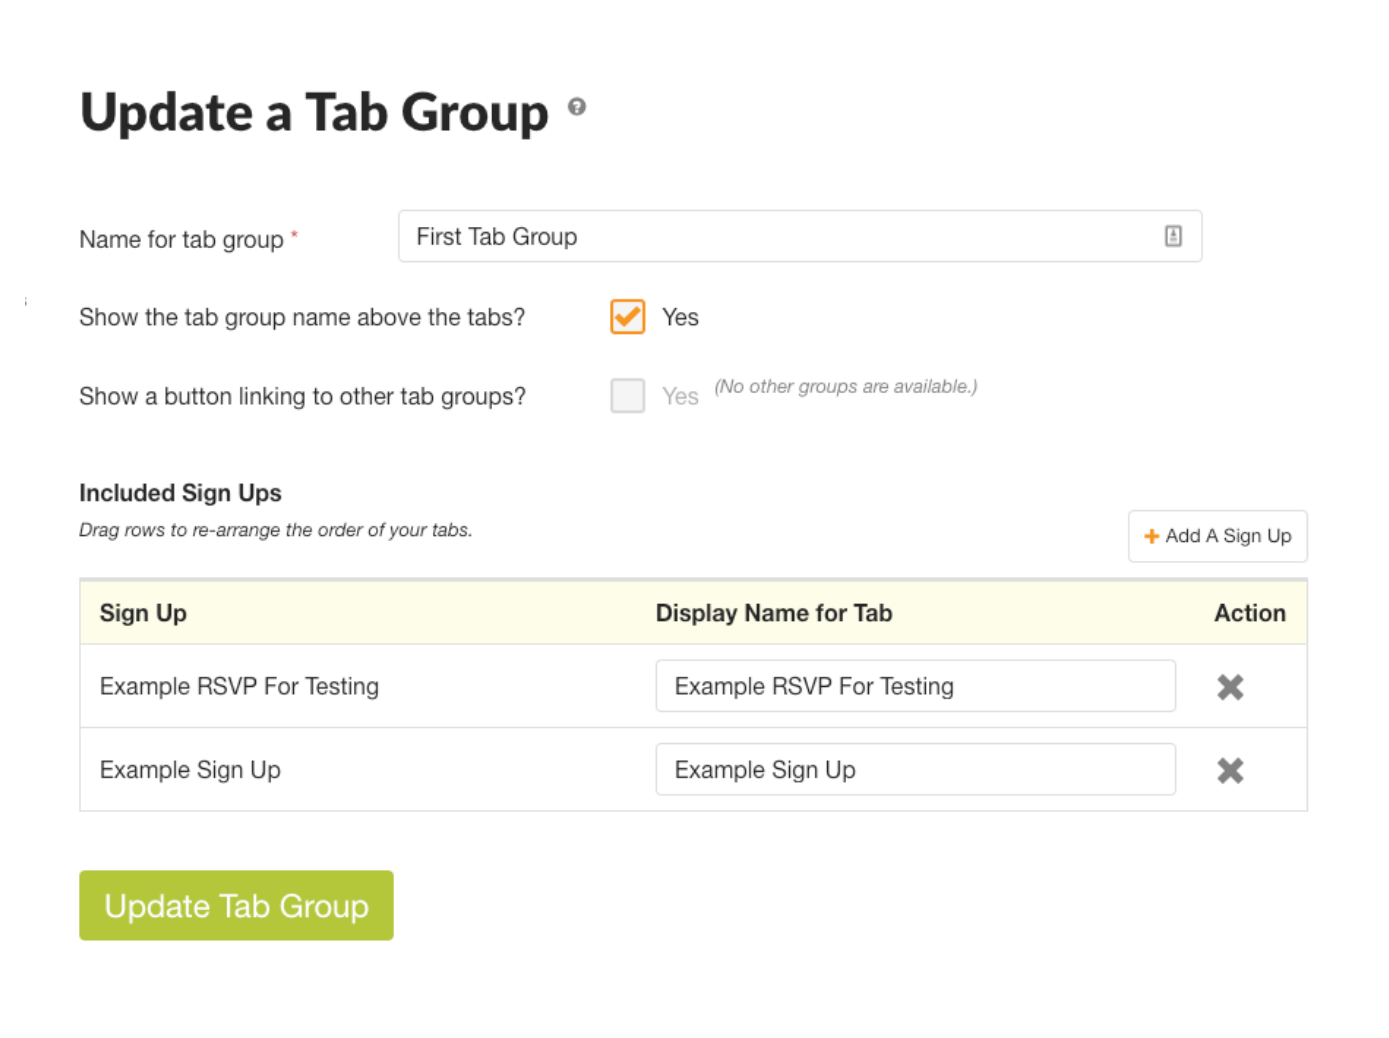 Update a Tab Group